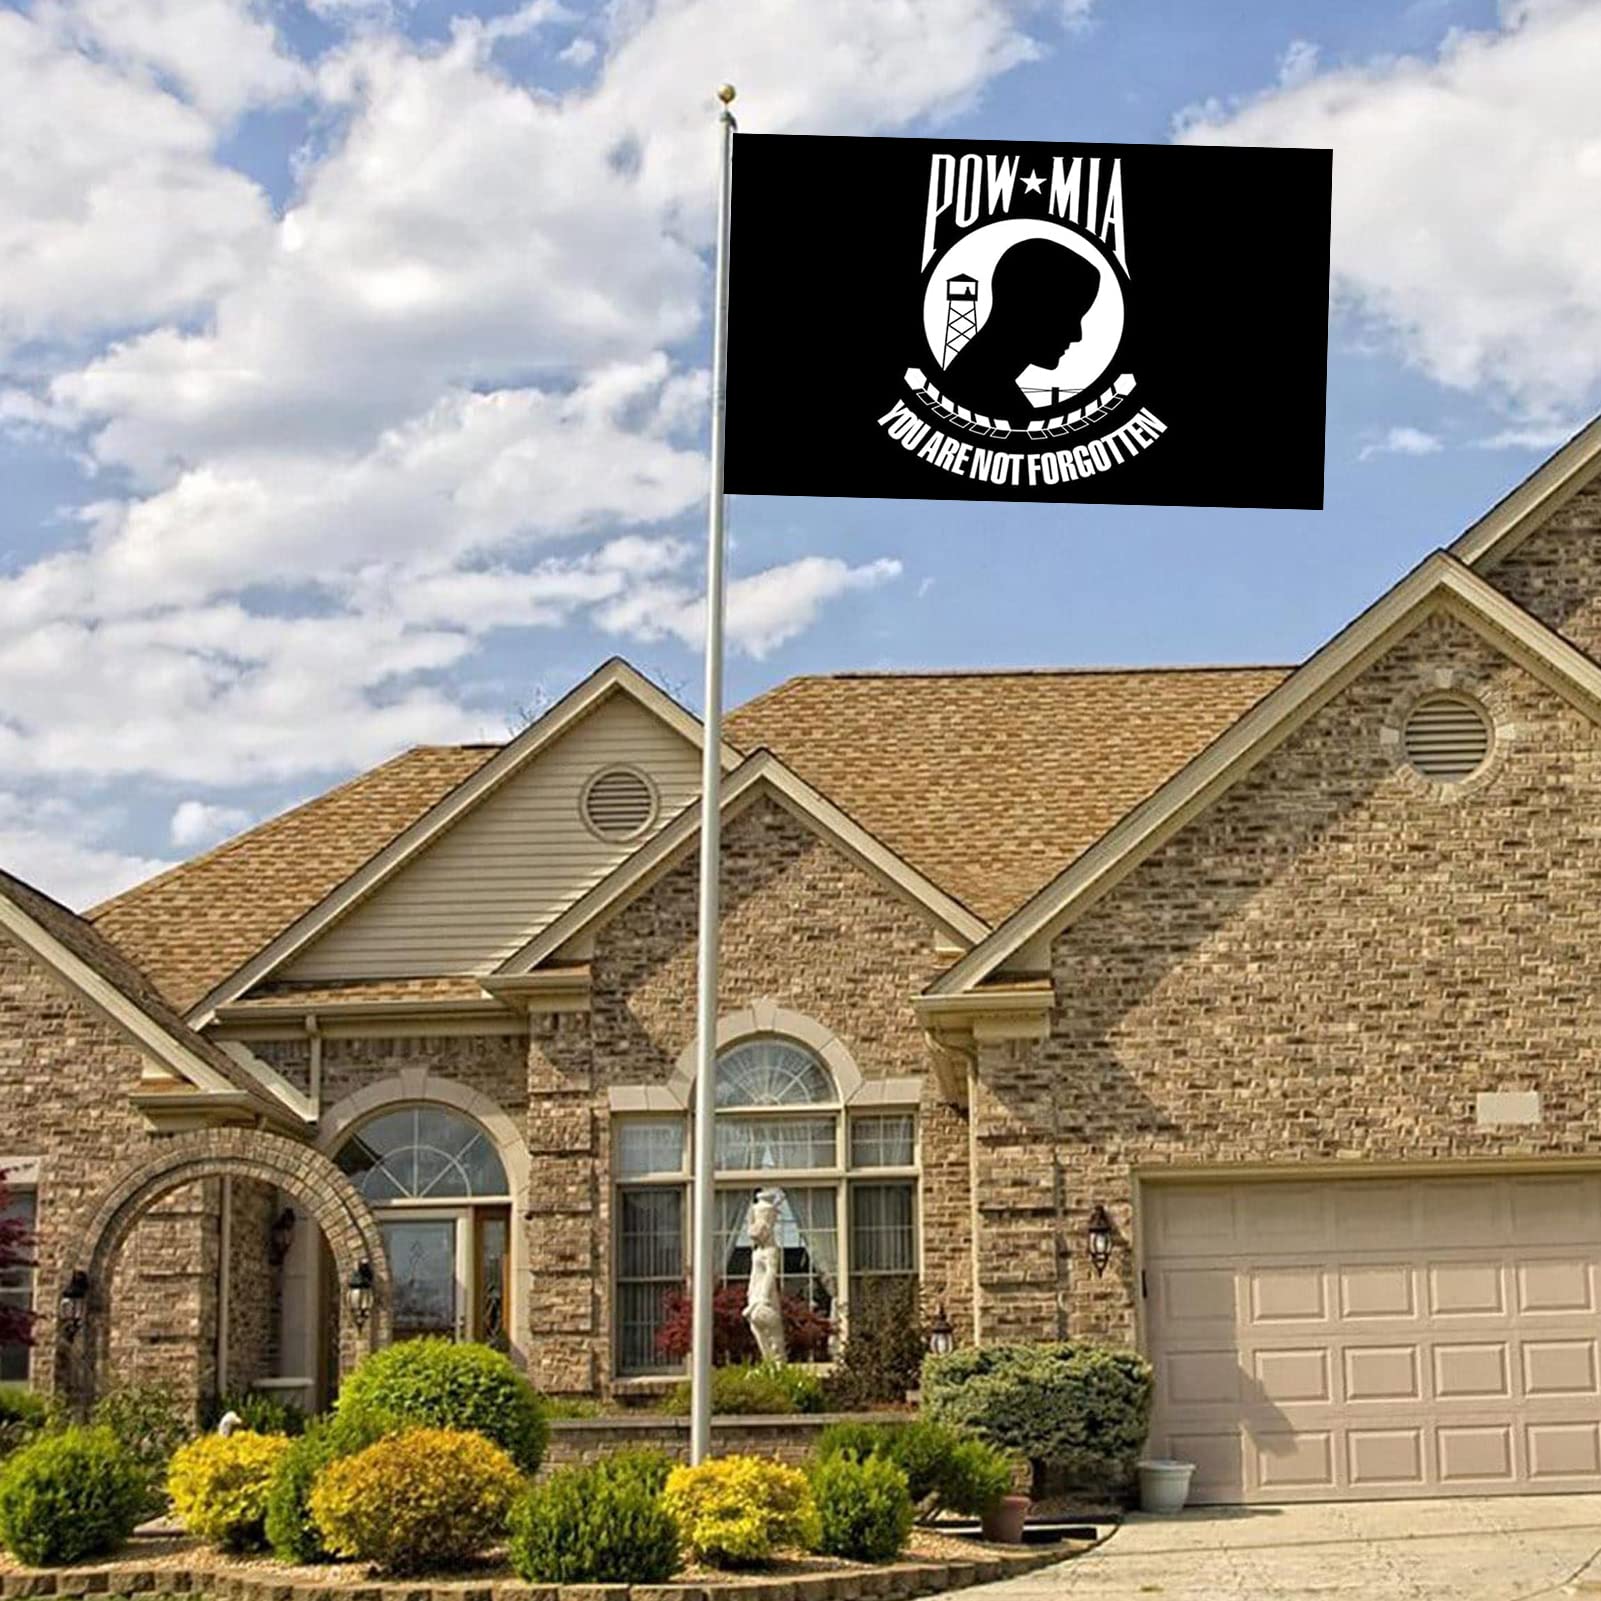 Mia Pow Flag 3x5 Outdoor Double Sided Made In USA-Black You are Not Forgotten Prisoner of War Military Flags Heavy Duty 3 Ply Fade Resistant for Outside Outdoor Indoor